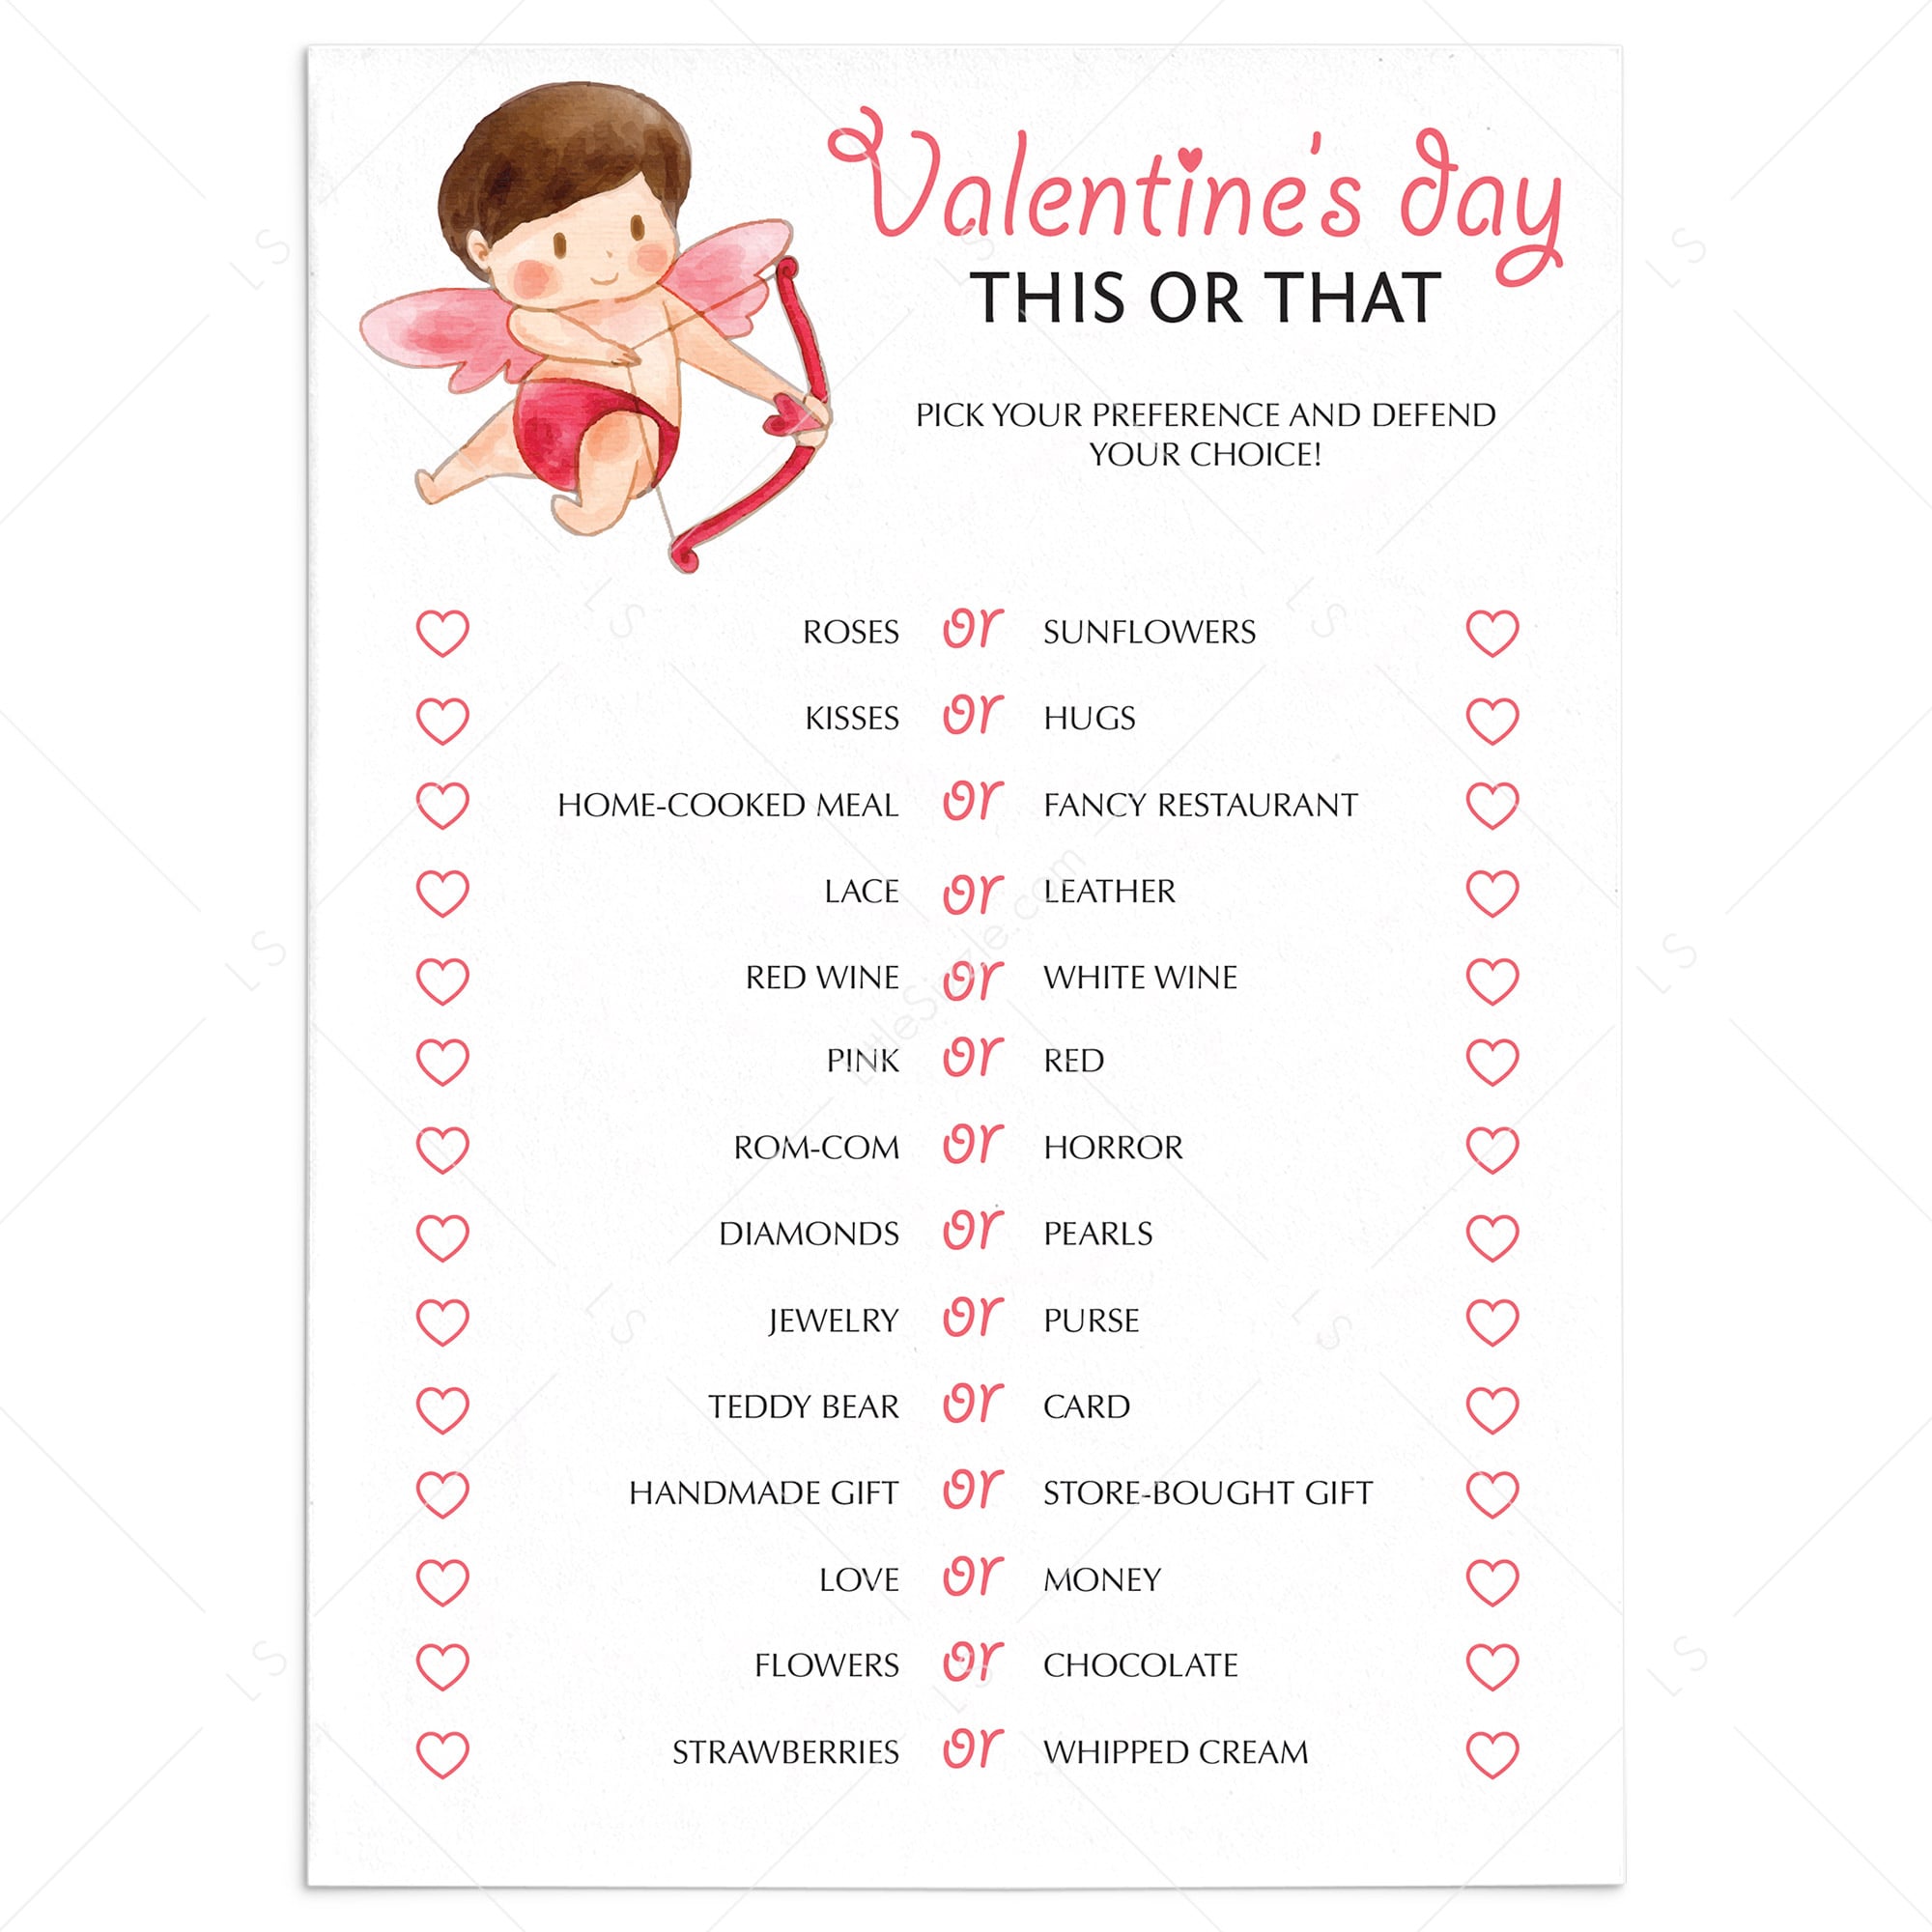 Fun Valentine's Day Game for Couples This or That by LittleSizzle